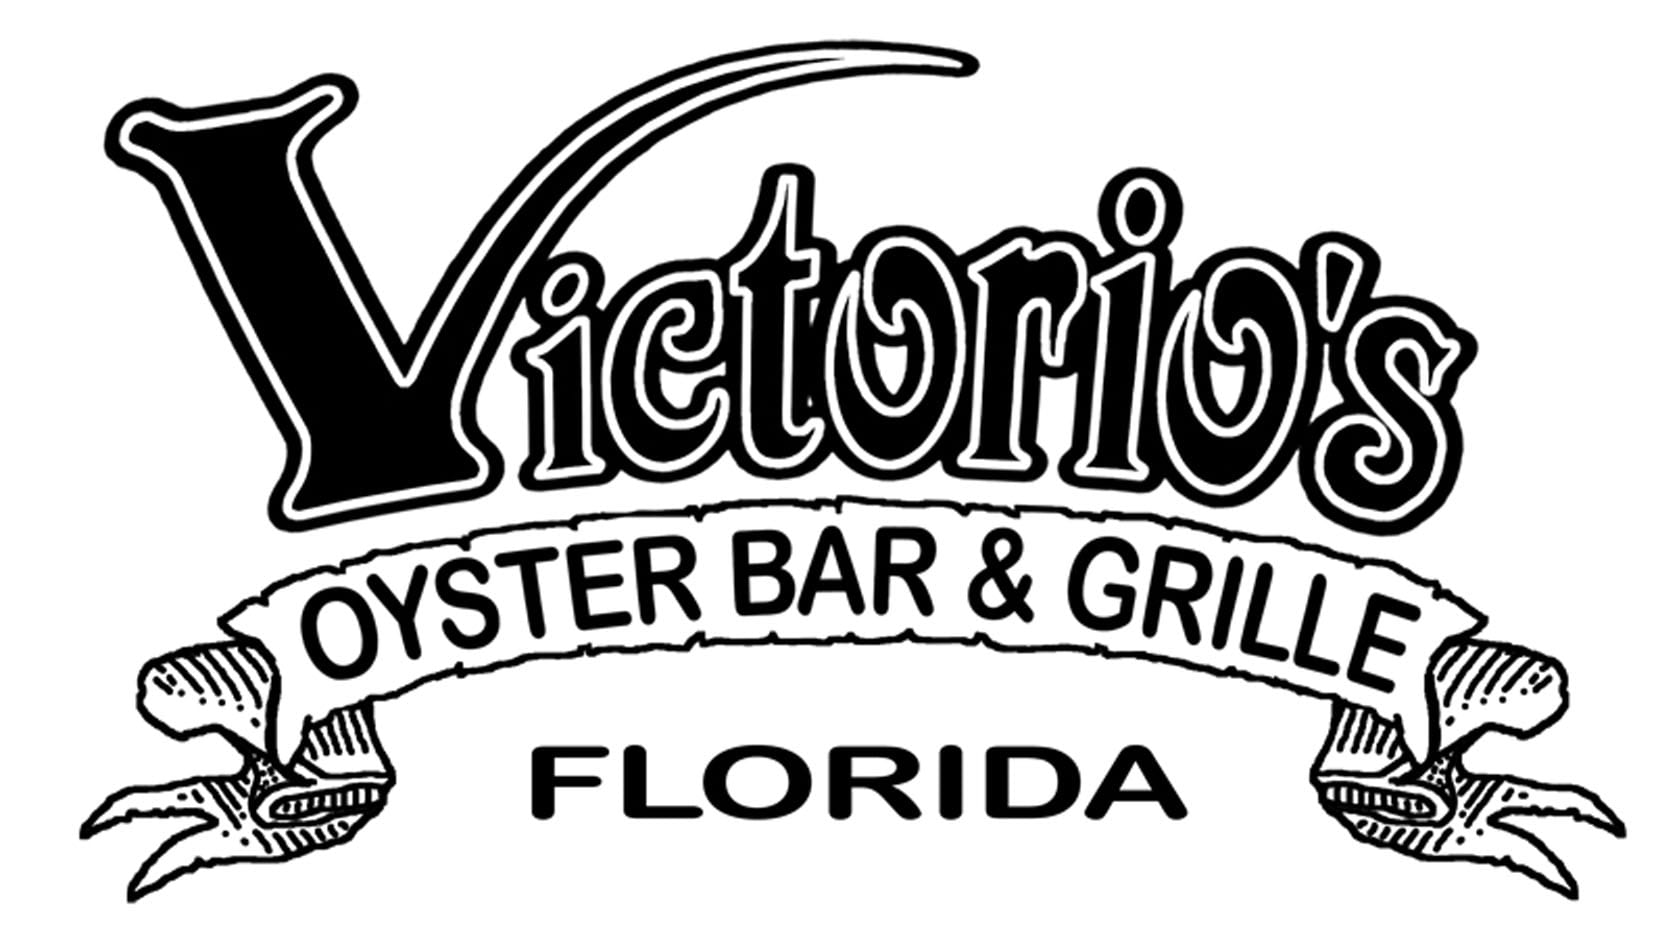 Victorio's oyster bar and grille logo